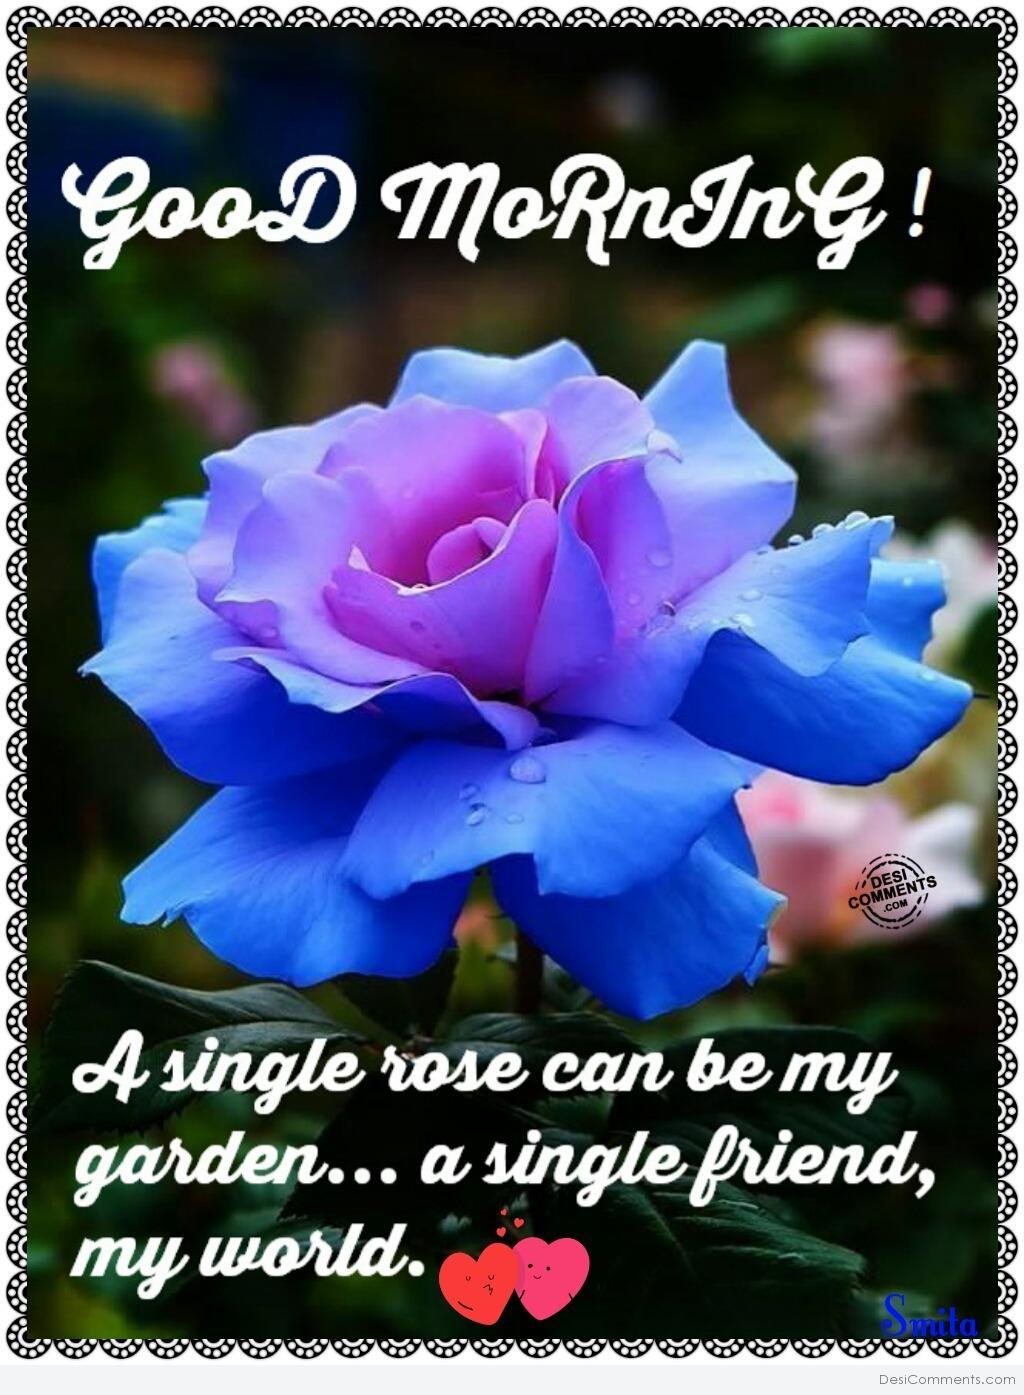 Good Morning – A single rose can be my garden… - DesiComments.com